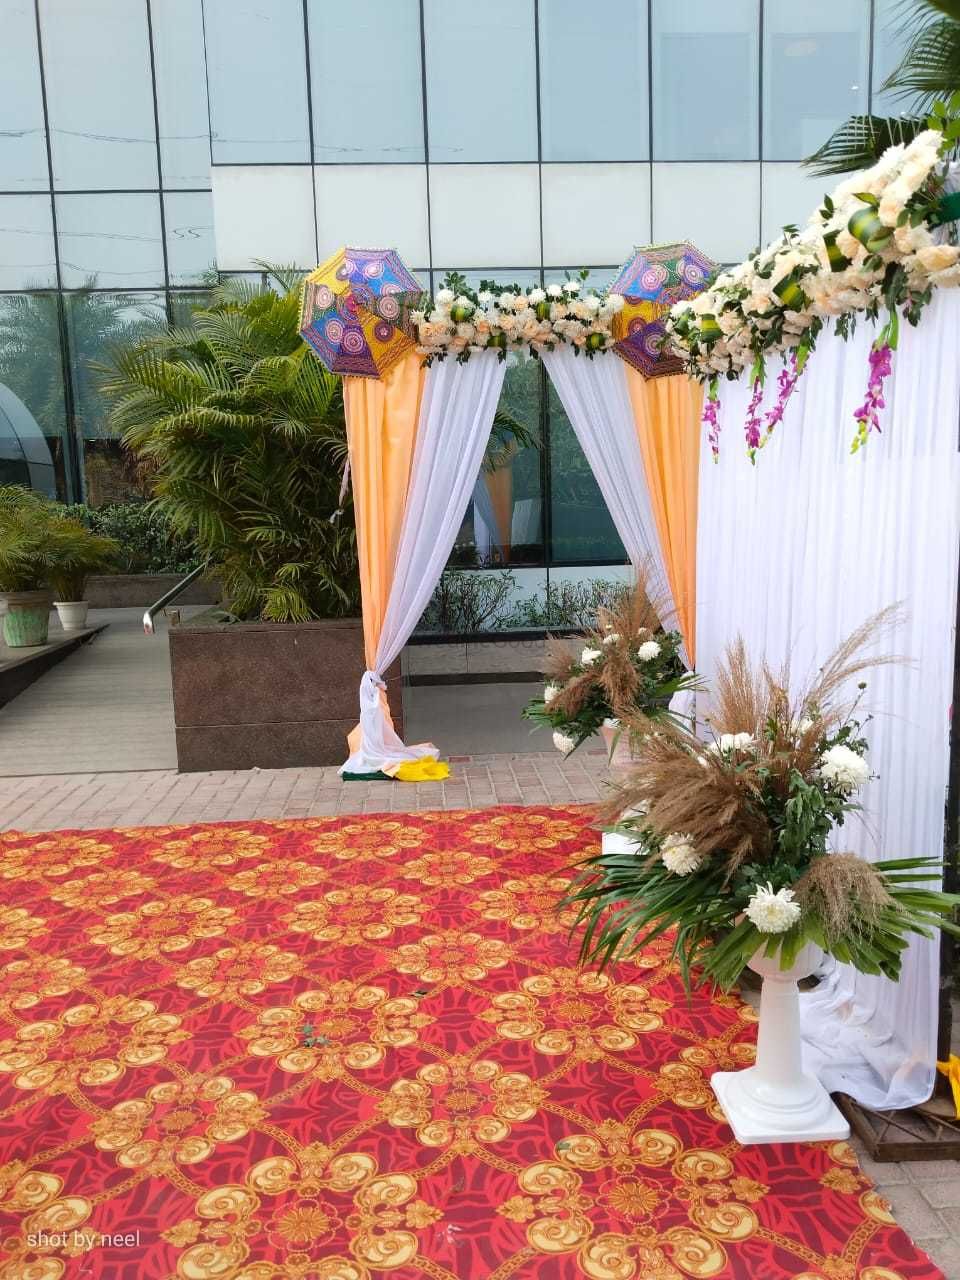 Photo By Chulha Caterers and Decorators - Decorators